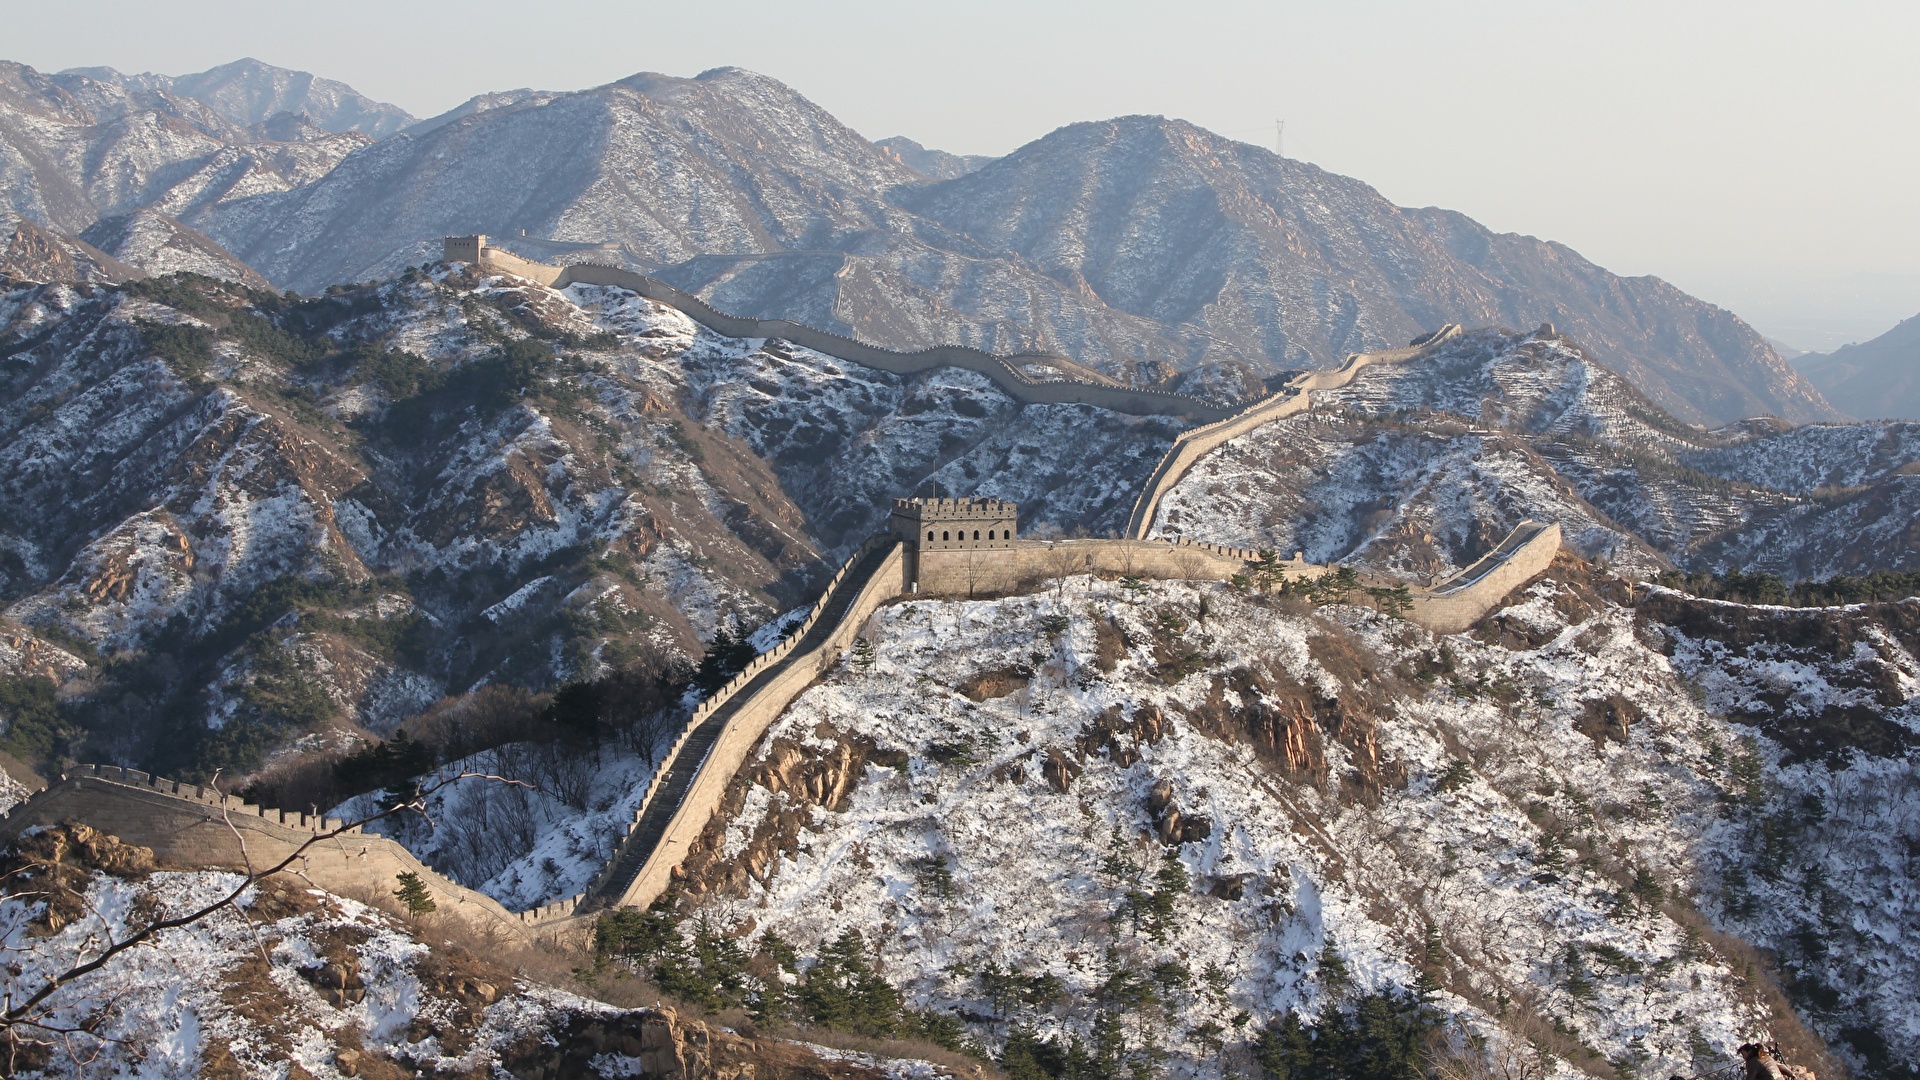 image China Winter Mountains The Great Wall of China Snow 1920x1080